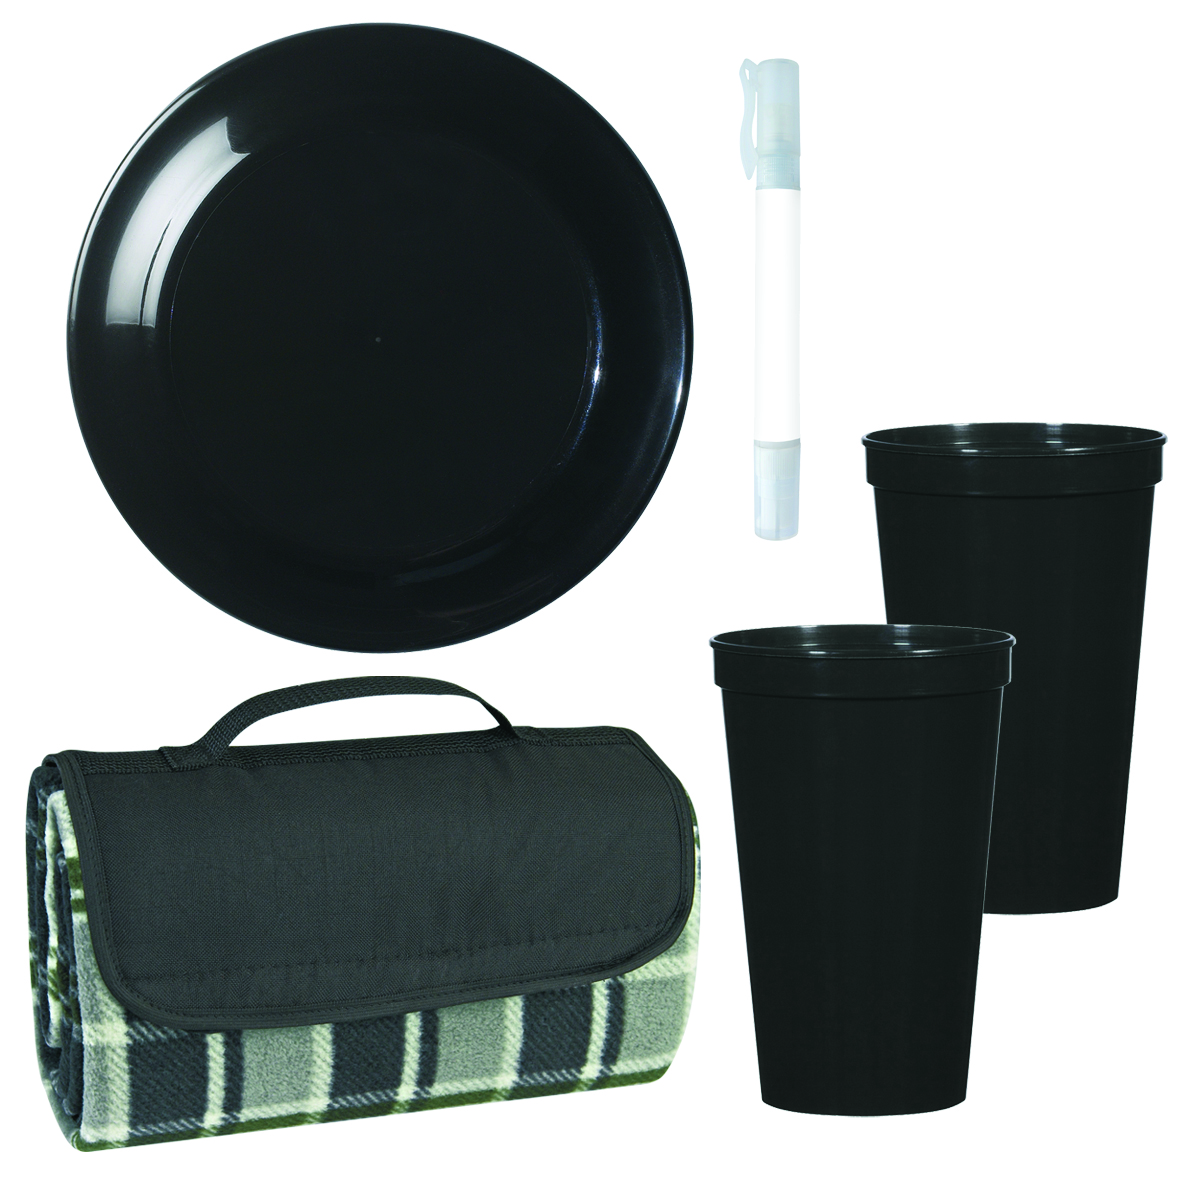 Black (Black/Gray Plaid Blanket, Black Discus and Stadium Cups) Picnic In The Park Kit